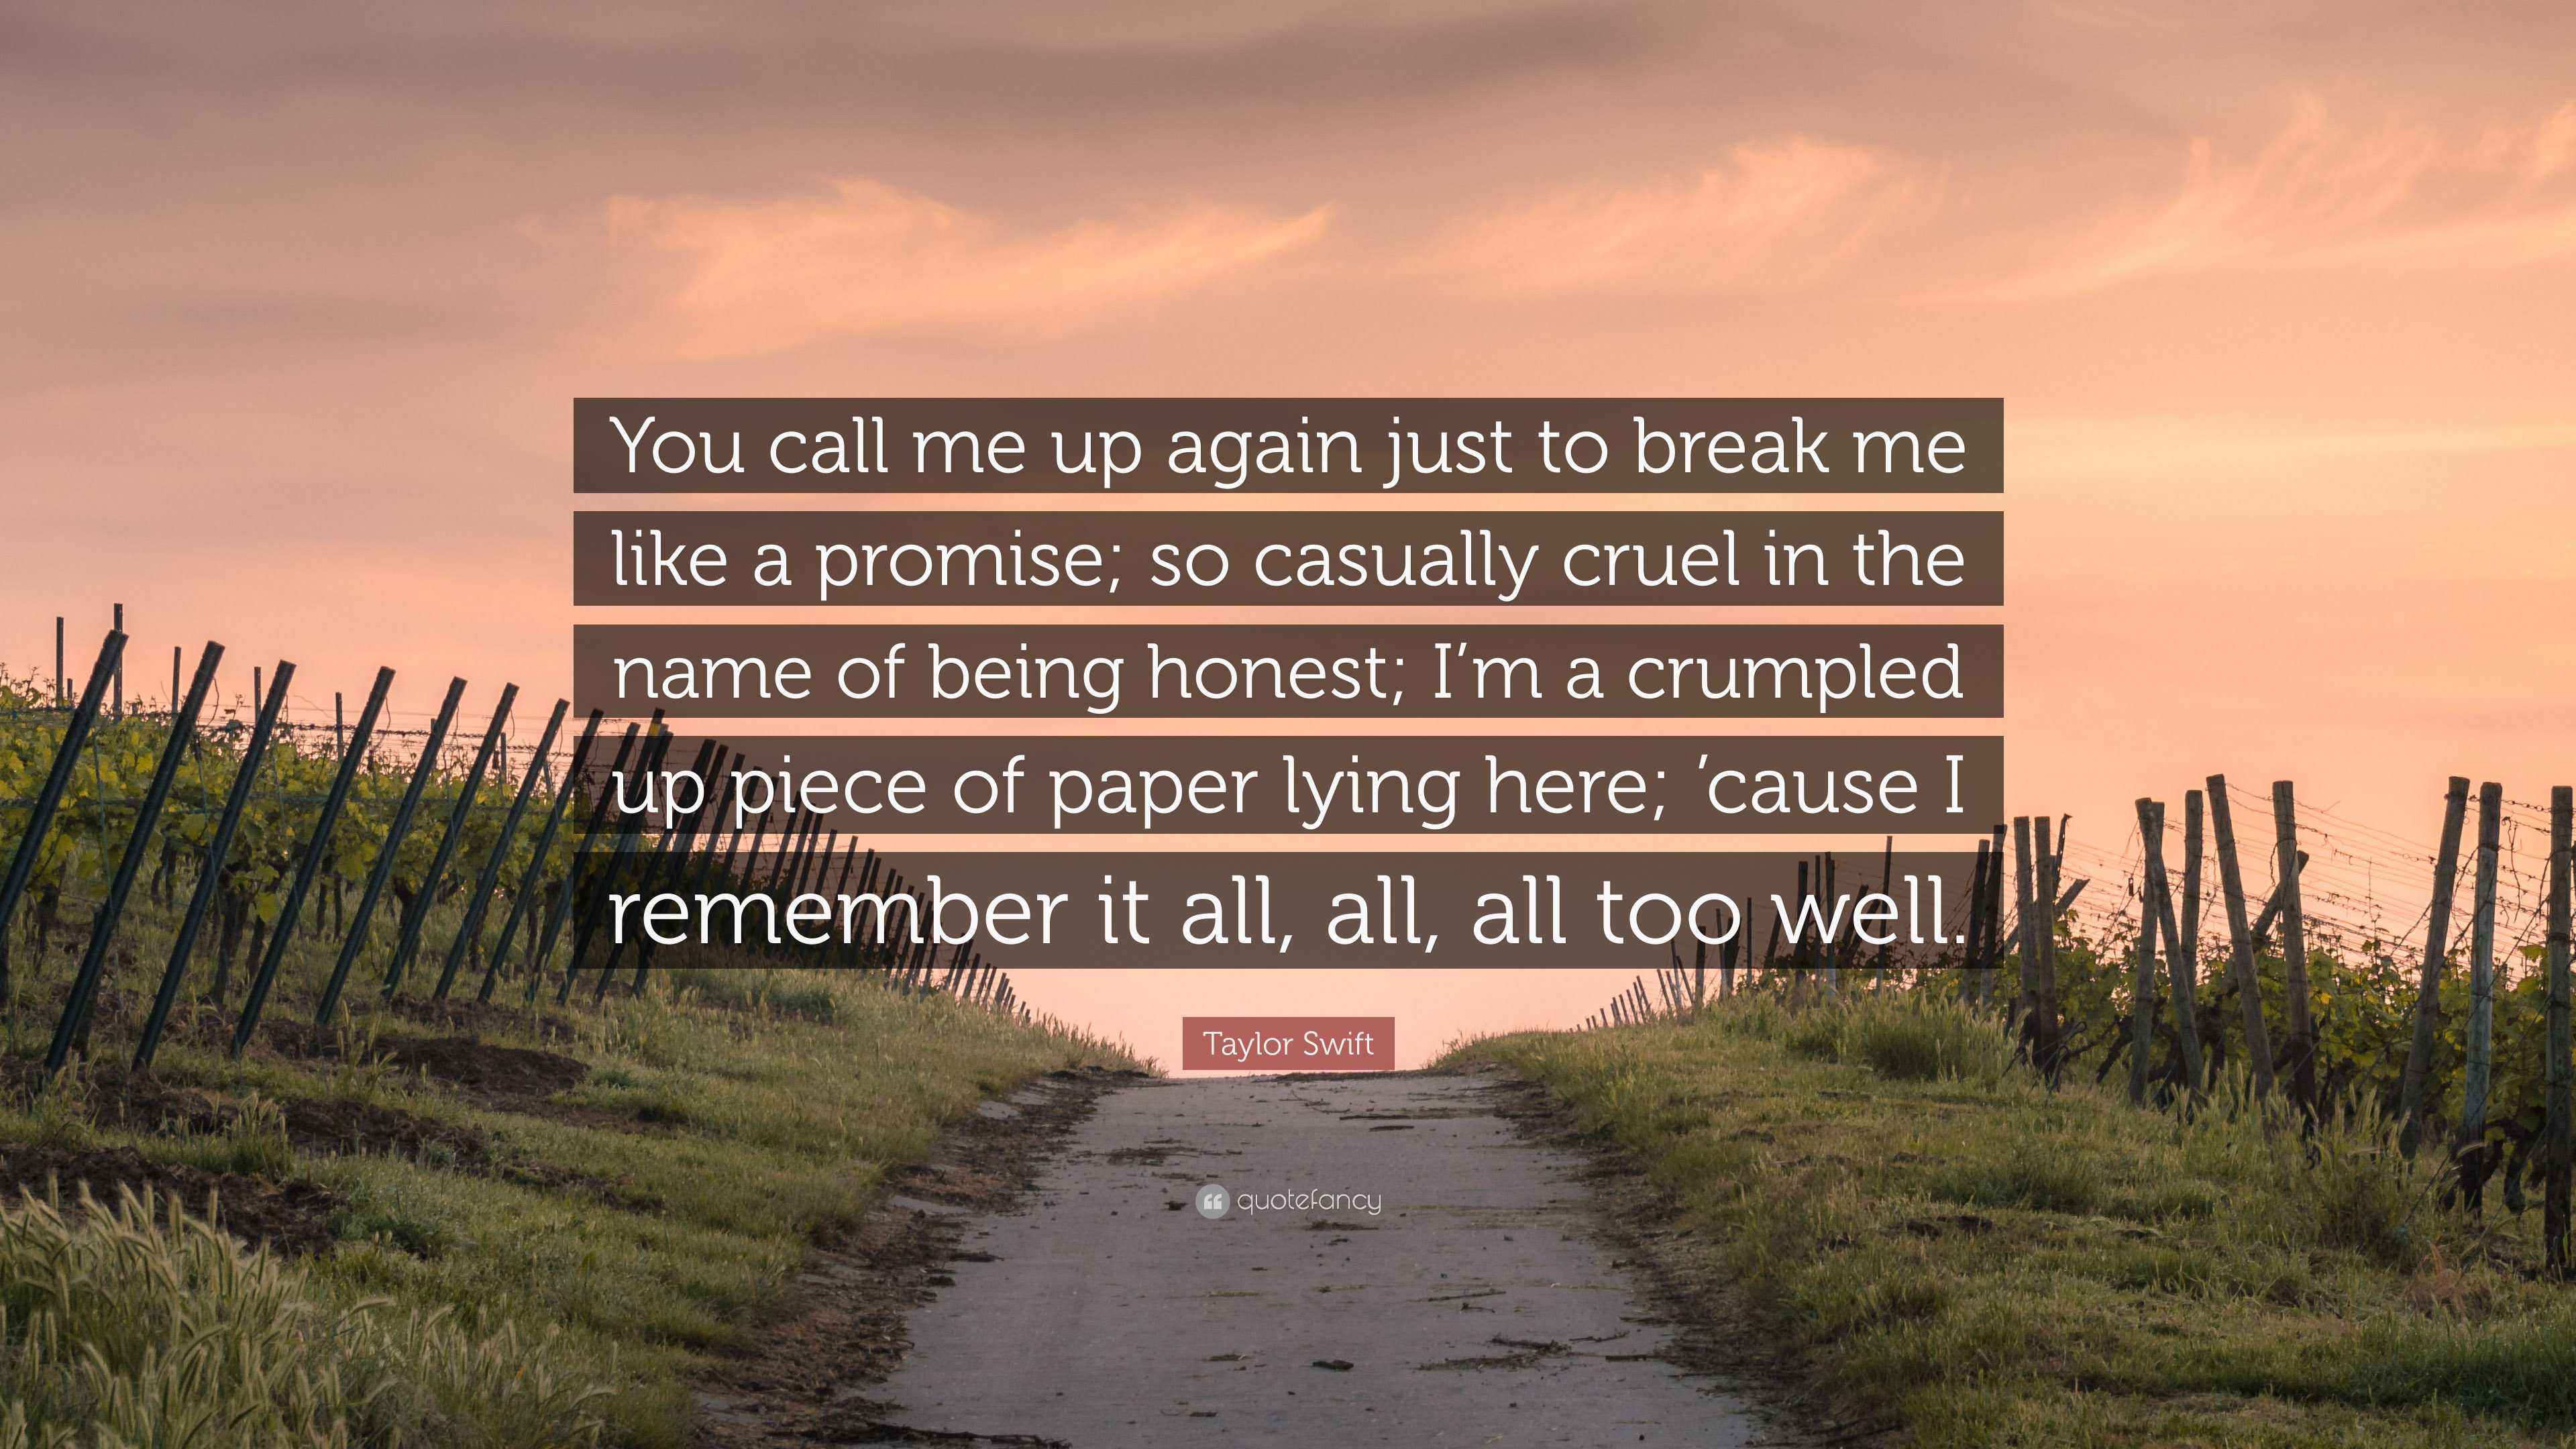 https://quotefancy.com/media/wallpaper/3840x2160/7756449-Taylor-Swift-Quote-You-call-me-up-again-just-to-break-me-like-a.jpg